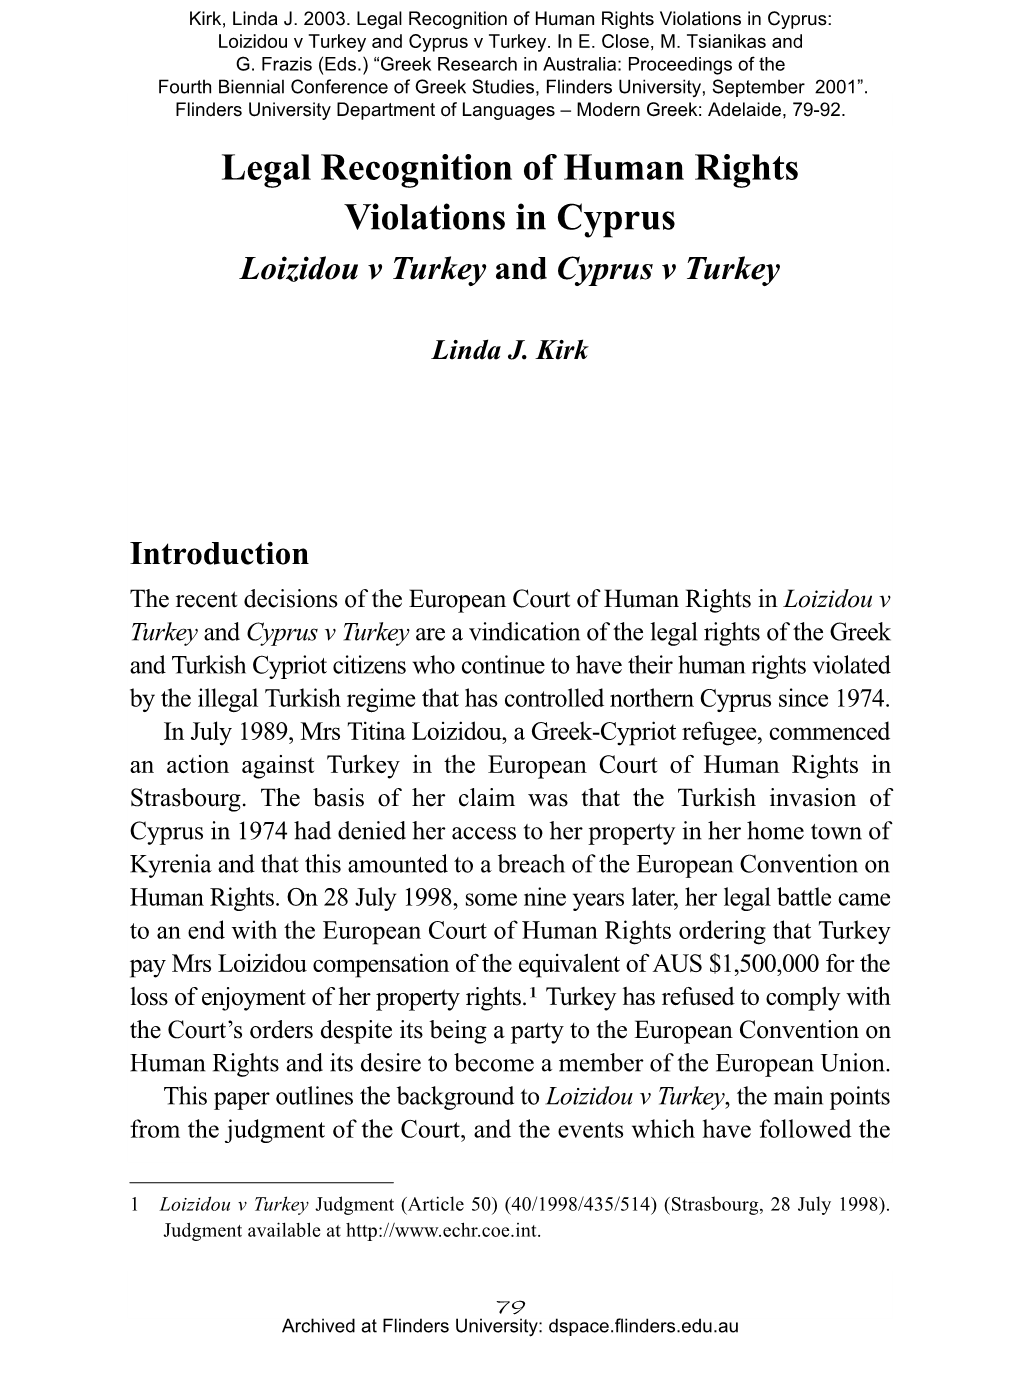 Legal Recognition of Human Rights Violations in Cyprus: Loizidou V Turkey and Cyprus V Turkey